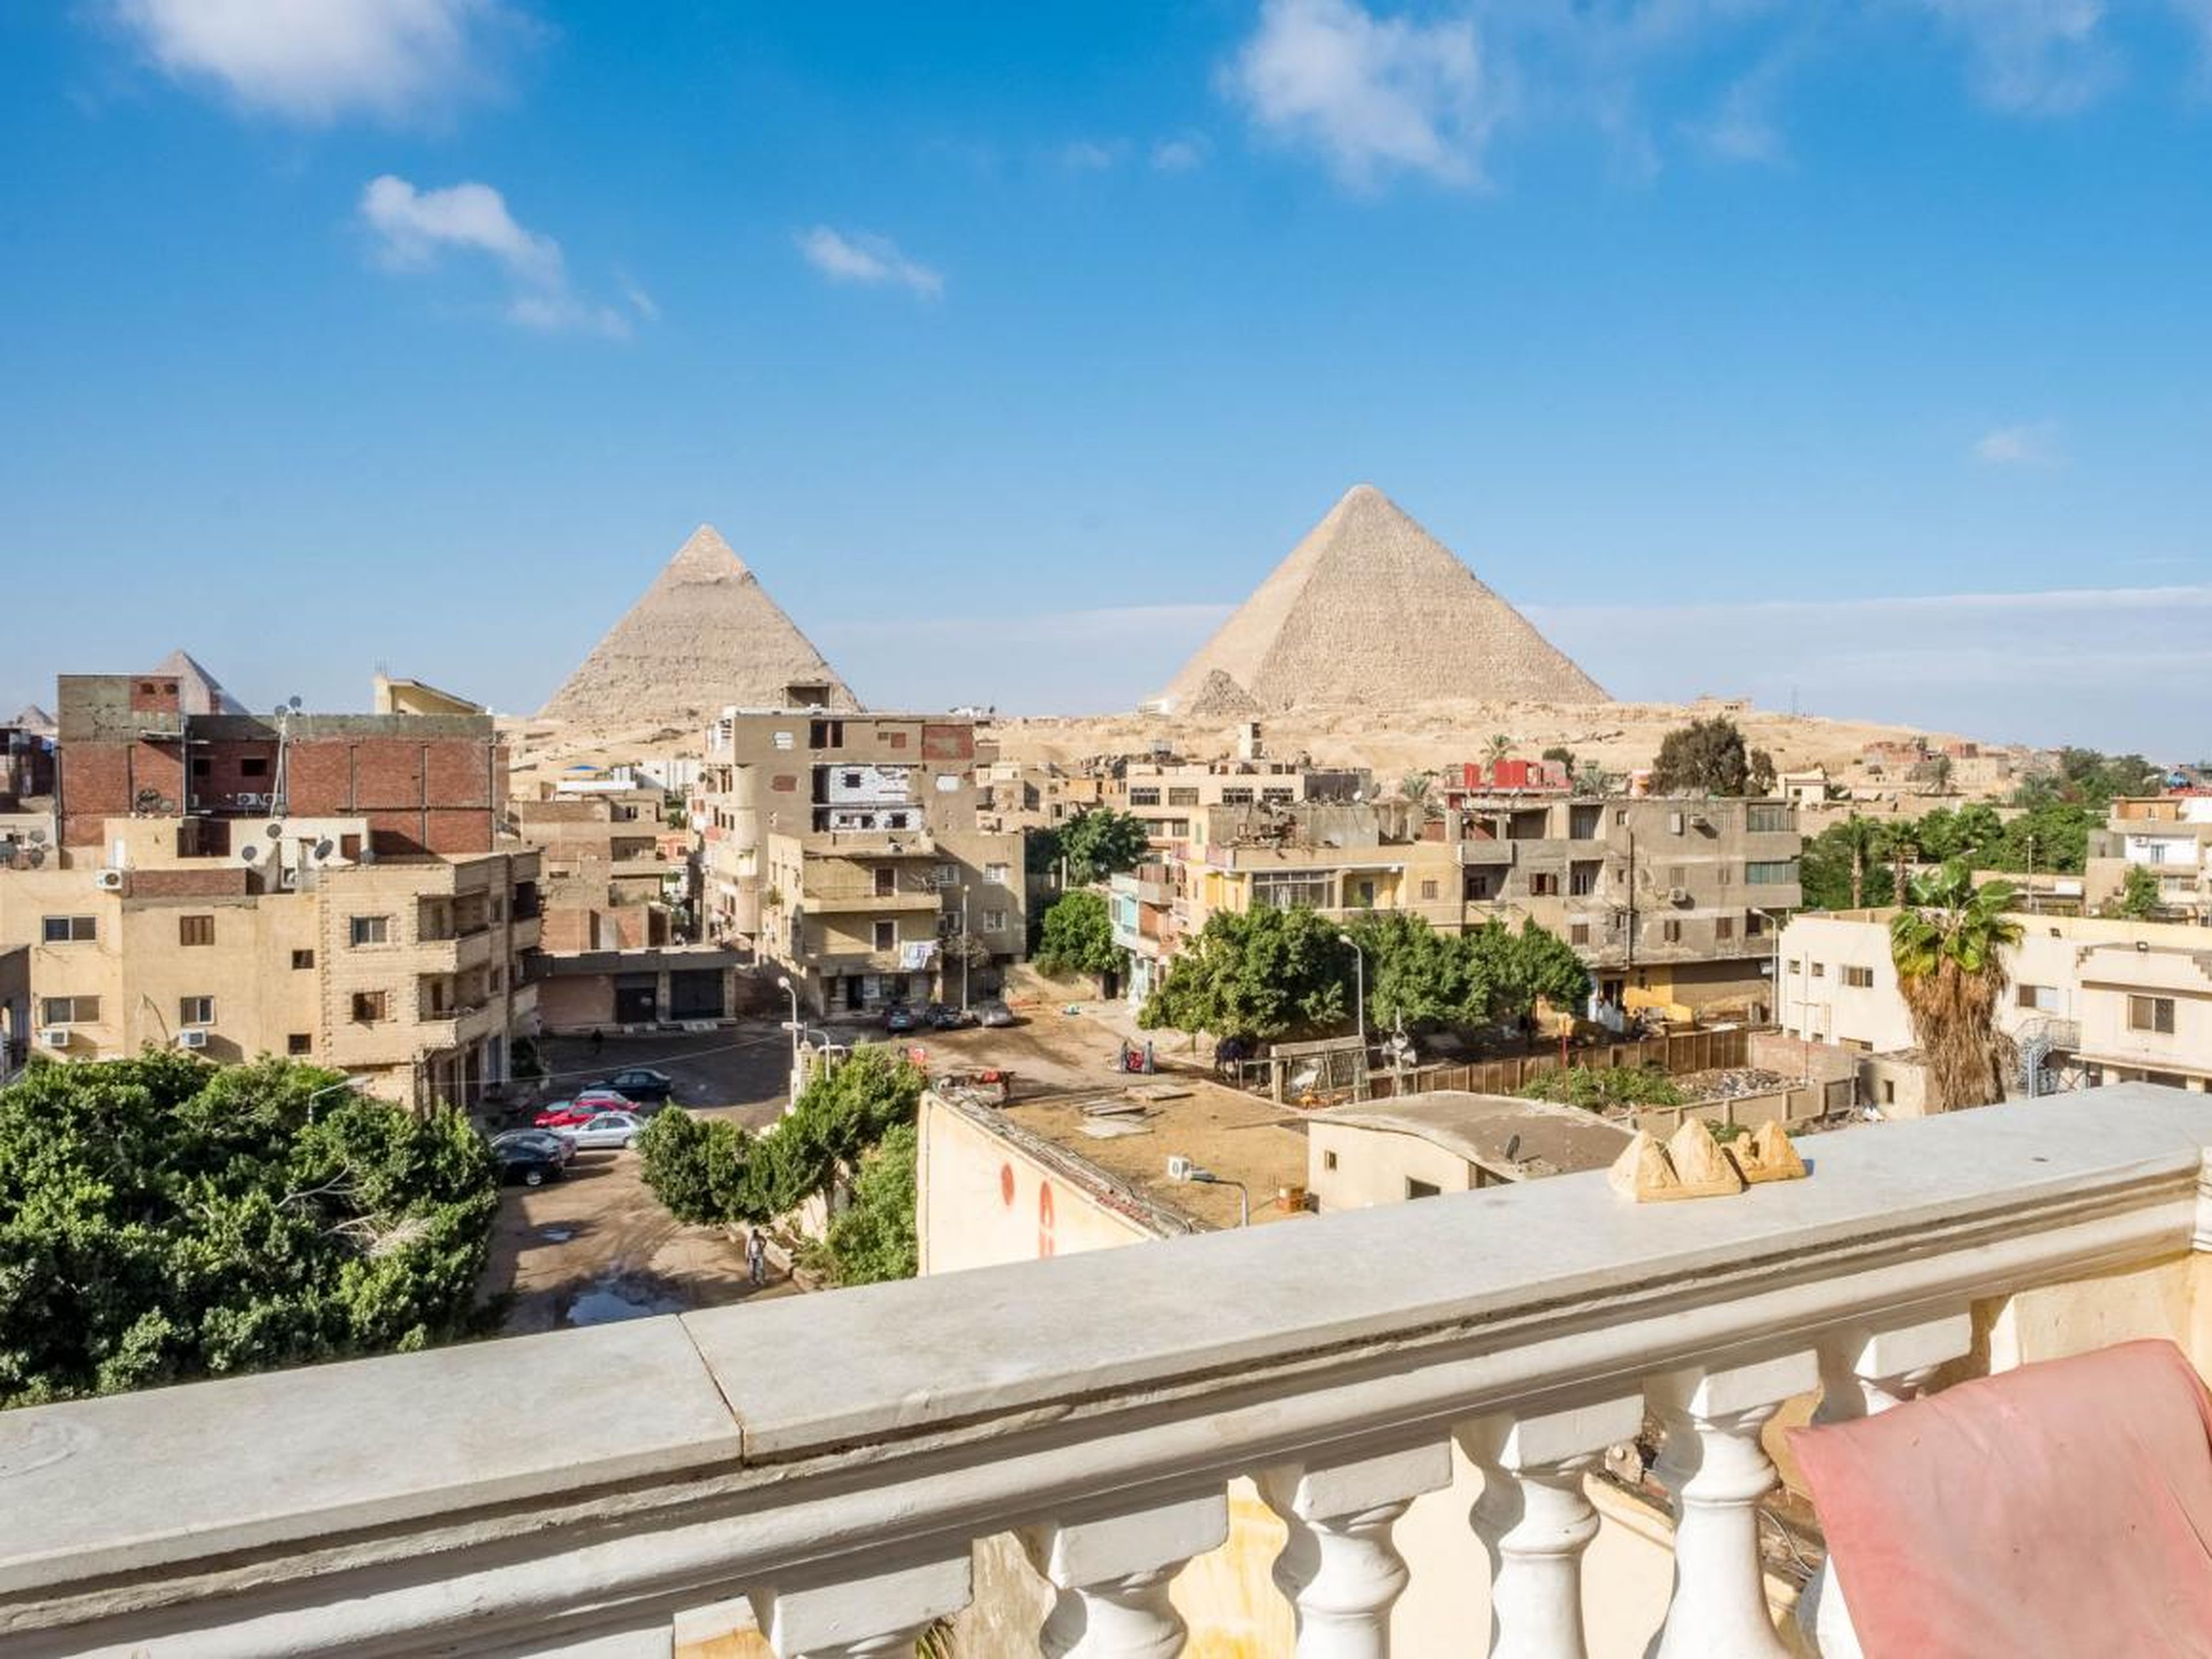 I stayed in the shadow of Egypt's iconic pyramids, and they're more surreal than any photos can show